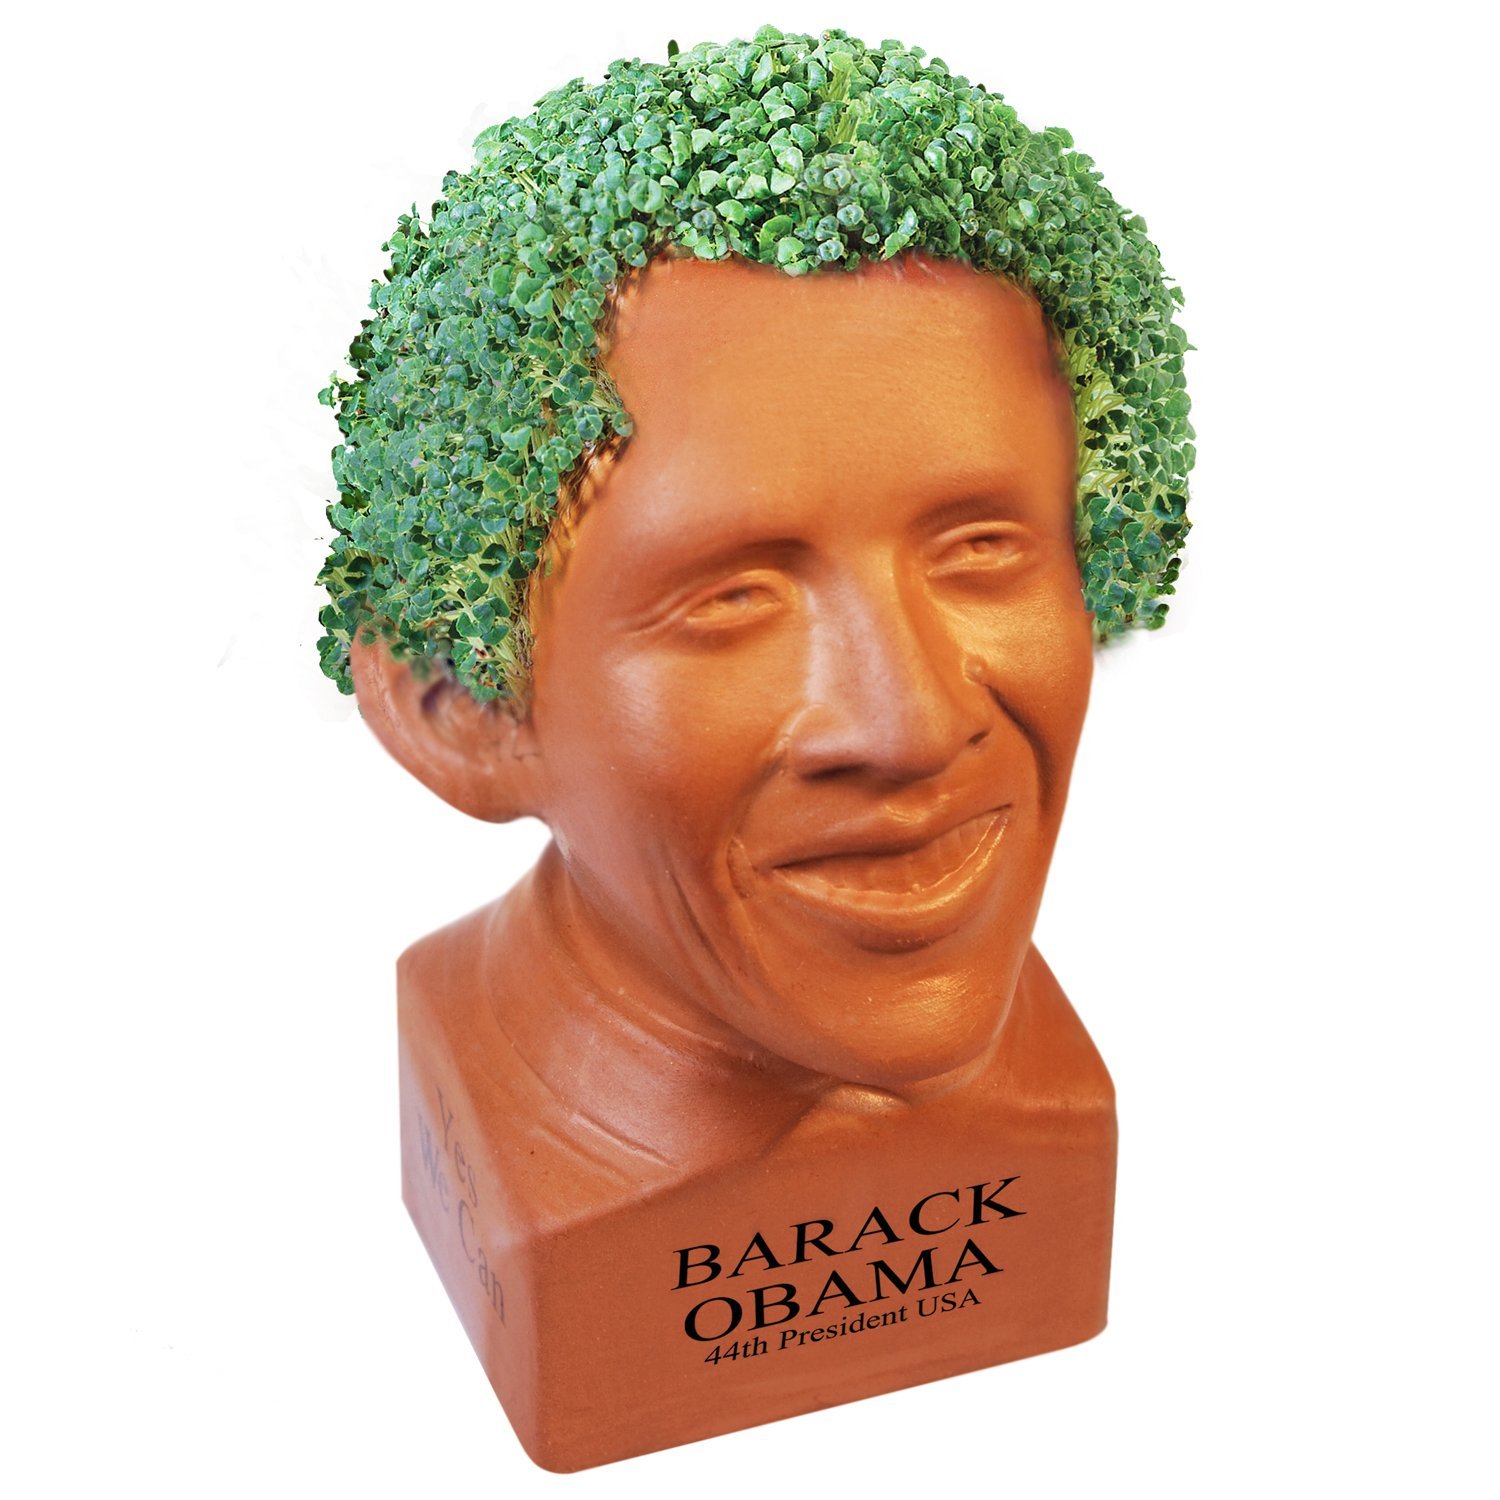 Chia Pet 10 Fanciful But BestSelling Products In America!